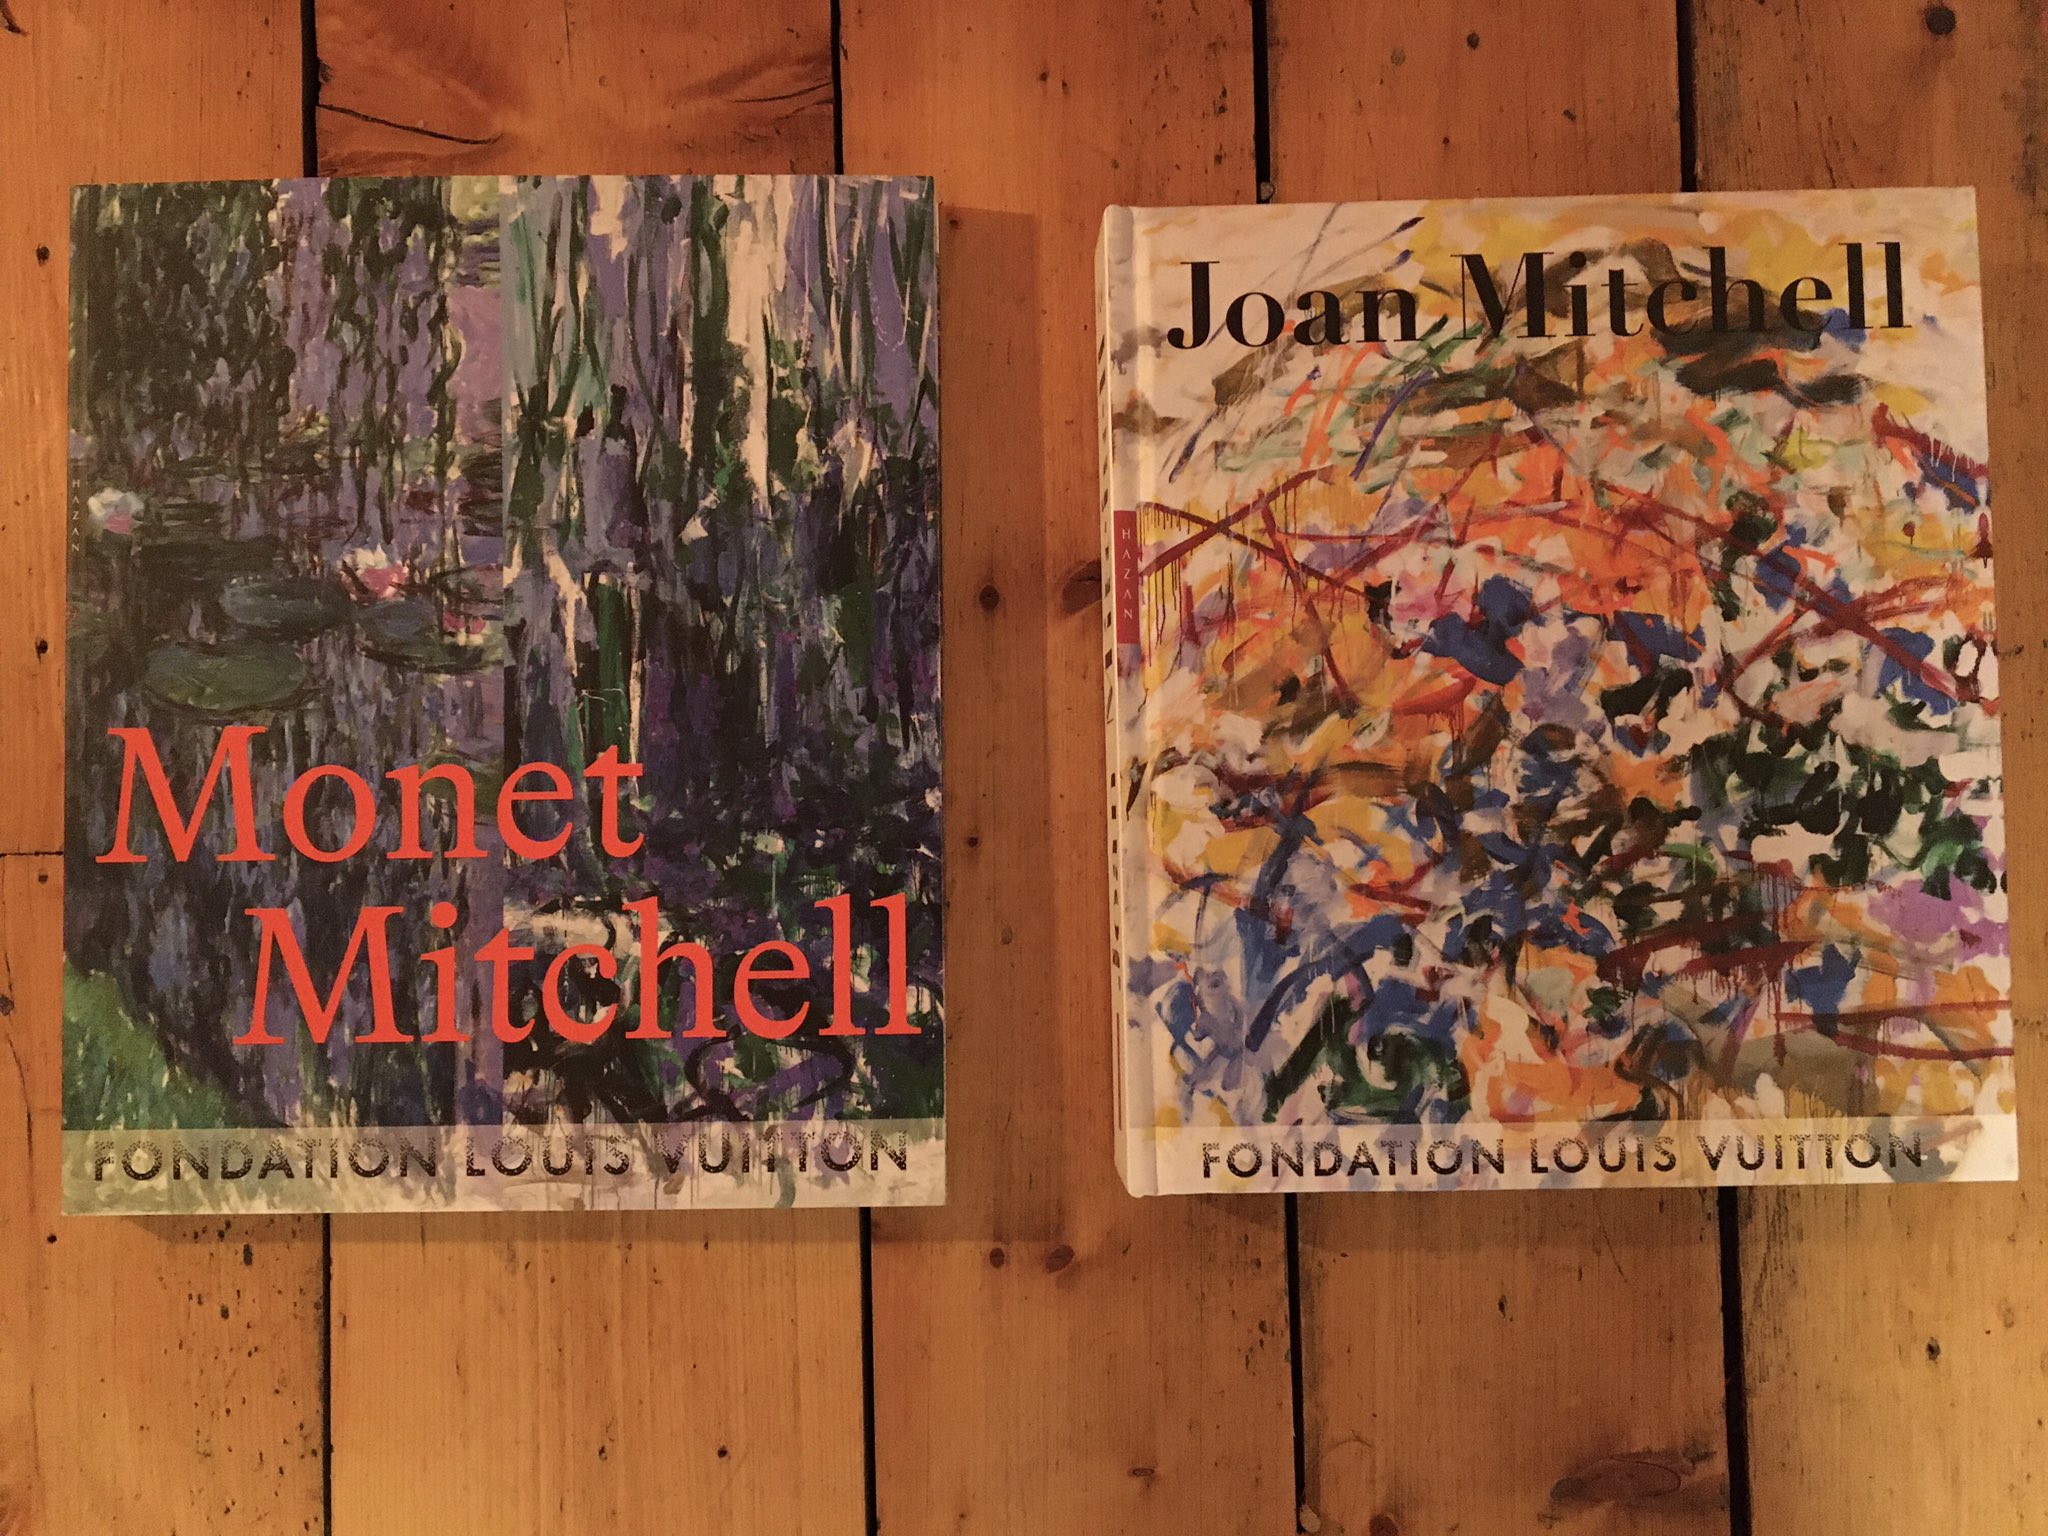 Vincent Guérend on X: While in Paris, one should not miss the stunning  Monet - Mitchell exhibition at the Louis Vuitton foundation, opened until  27th February.  / X